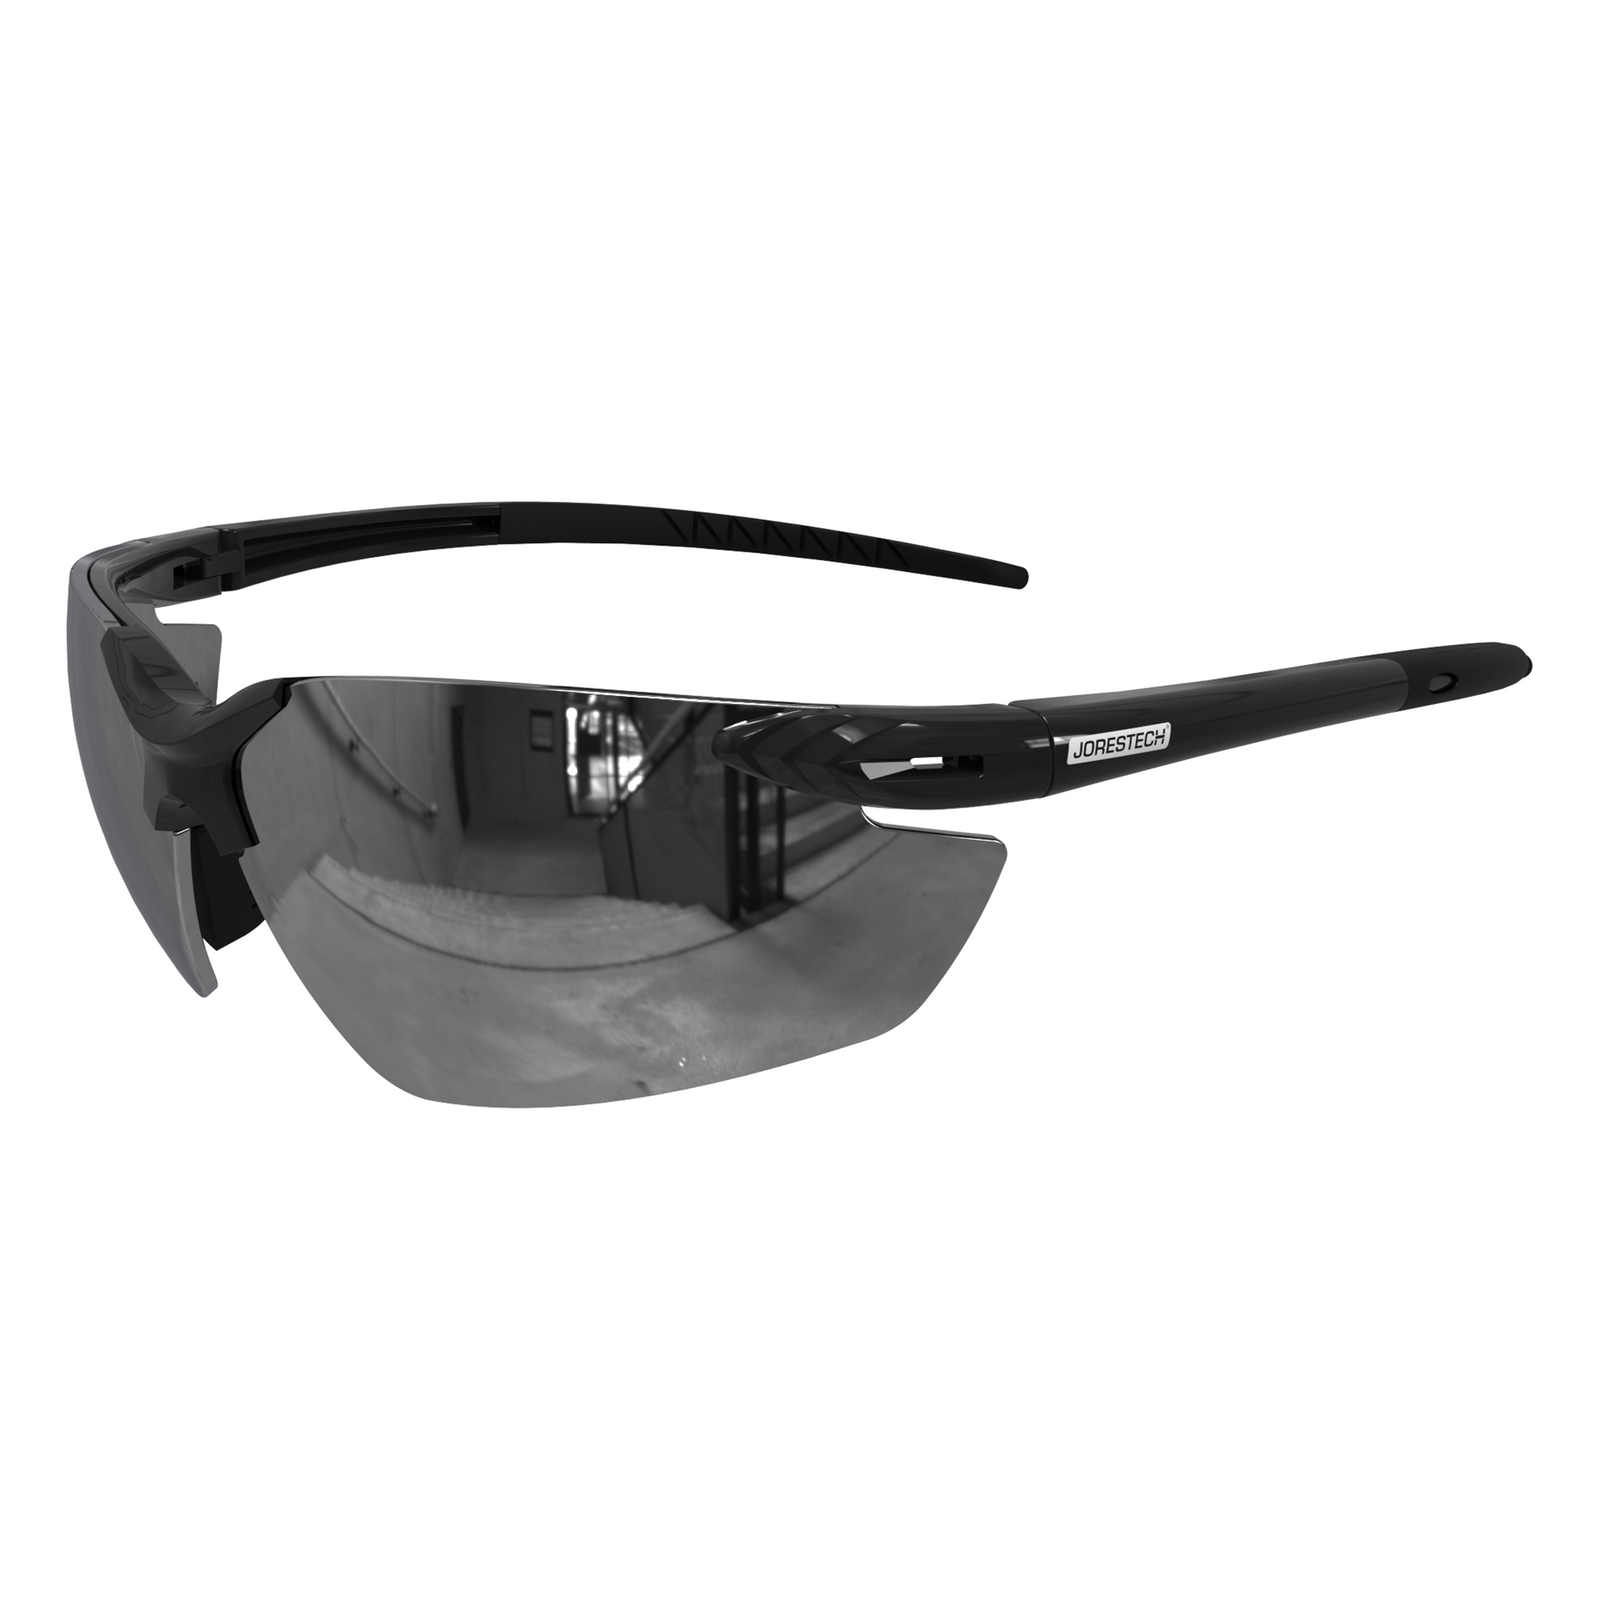 The hi performance polycarbonate mirror smoke lenses and black frame with flexible temples for outdoors